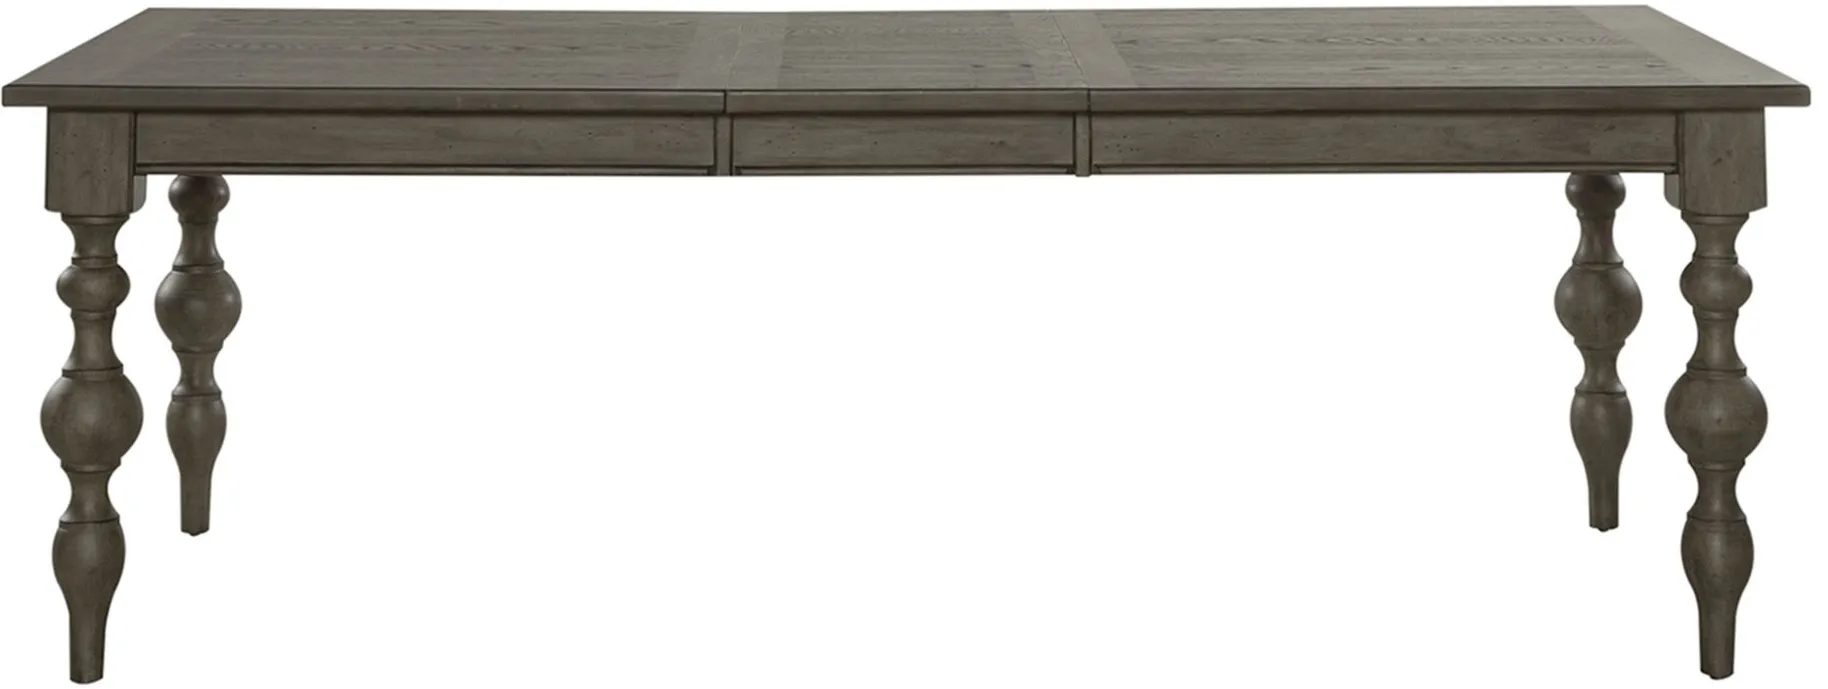 Americana Farmhouse Table in Dusty Taupe by Liberty Furniture